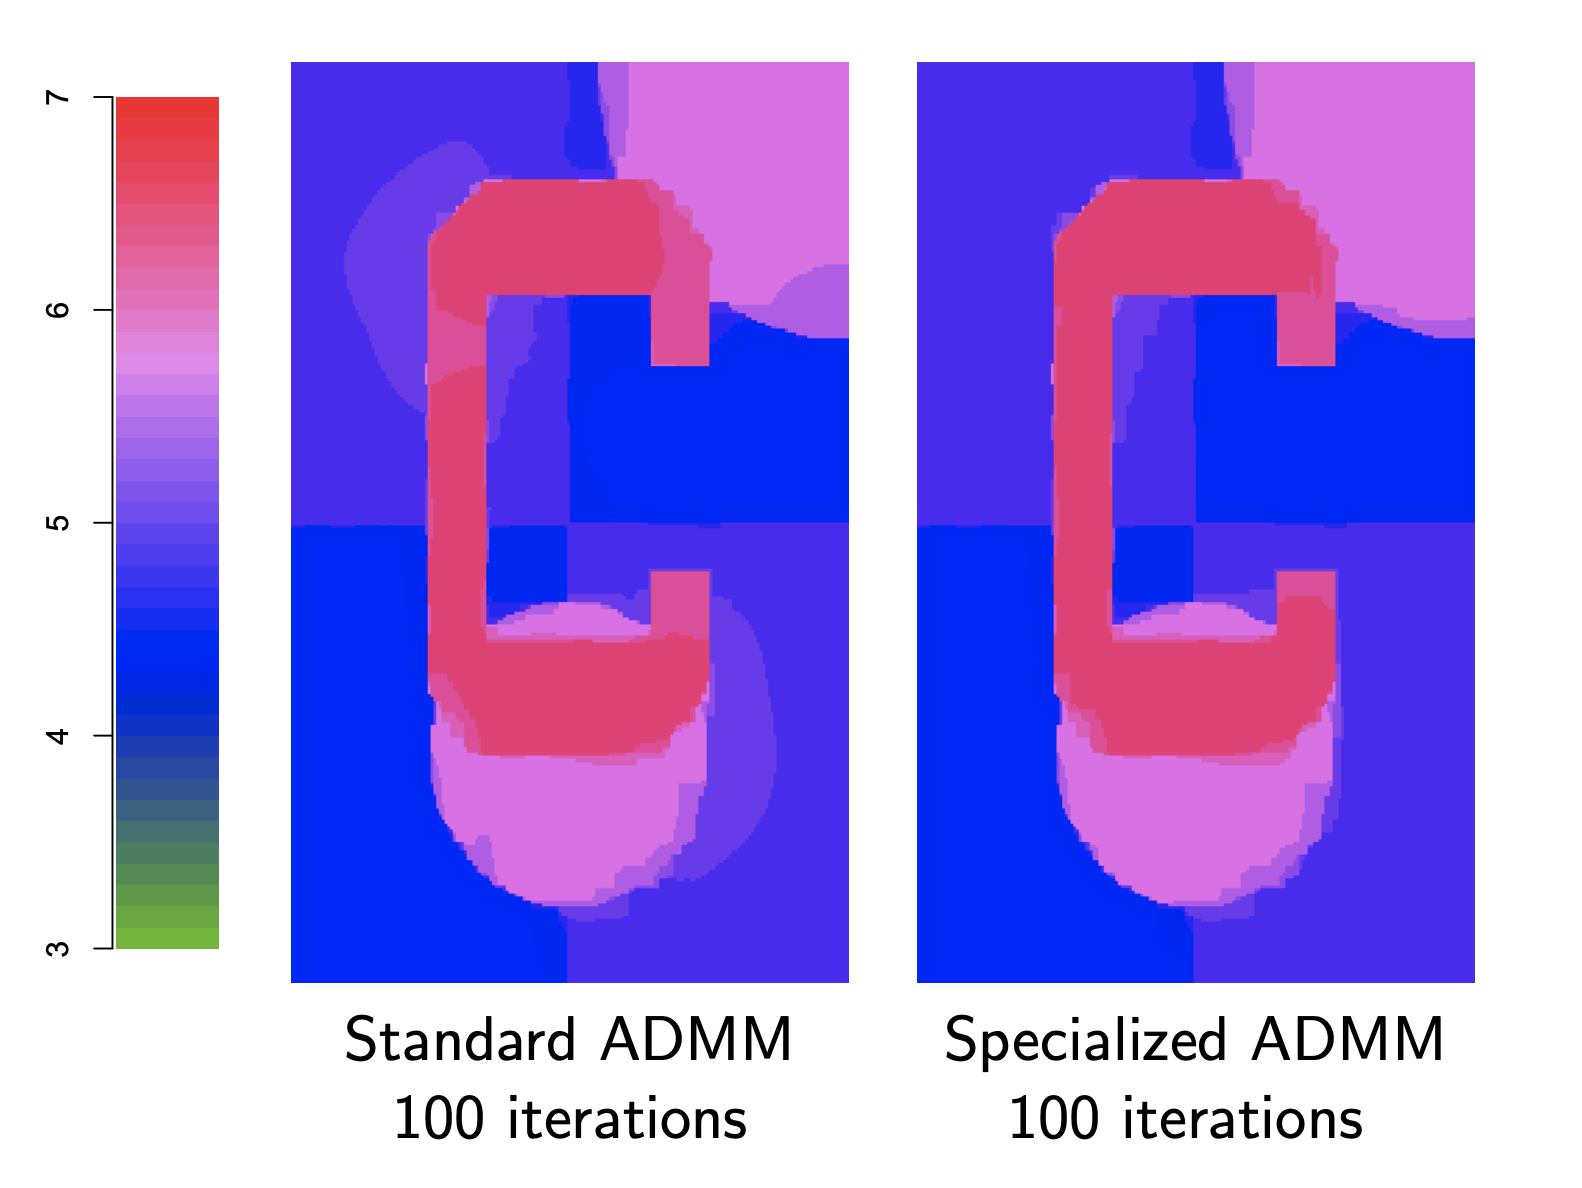 [Fig 5]  ADMM iterates visualized after k = 10, 30, 50, 100 iterations [3]